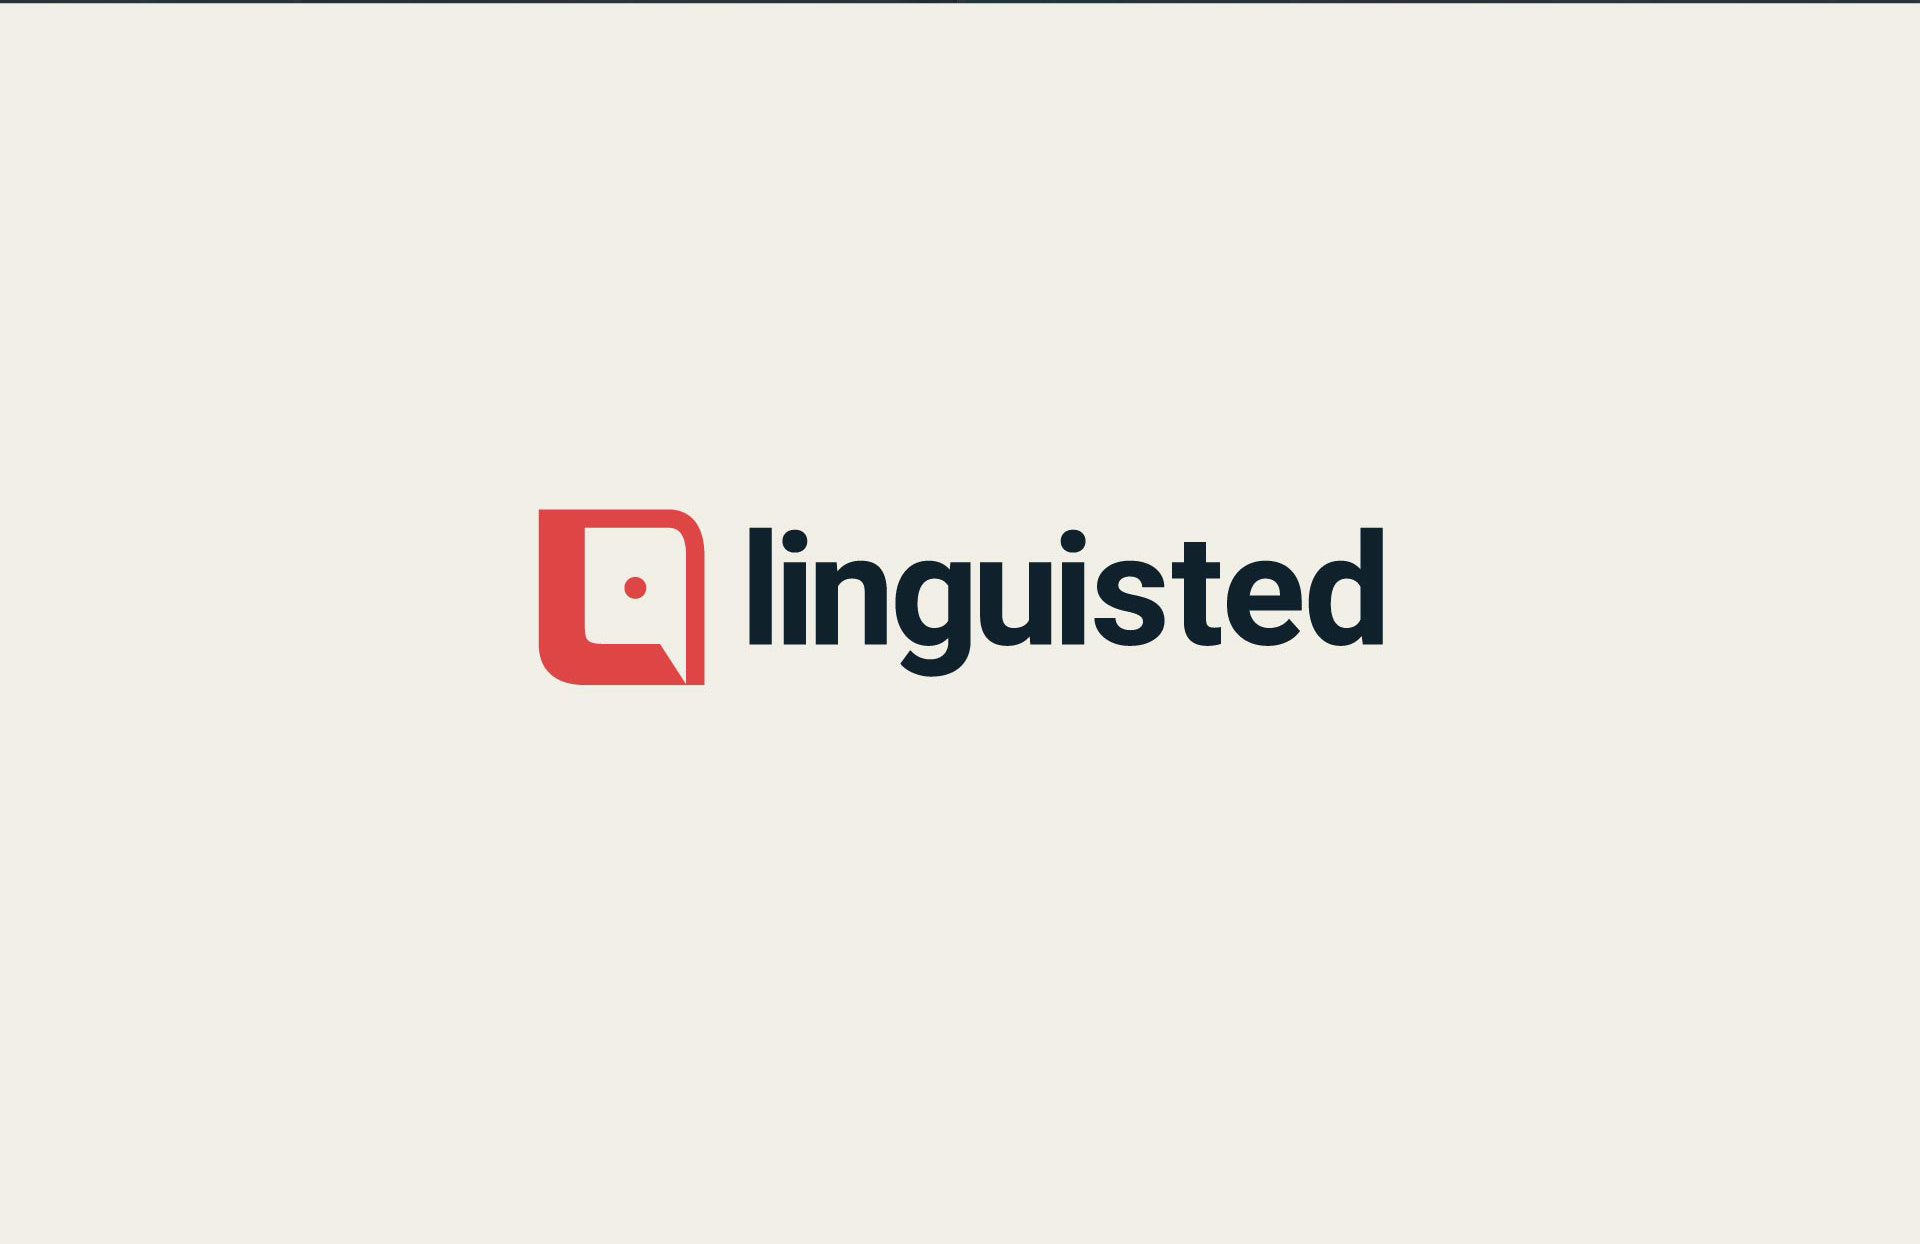 Linguisted